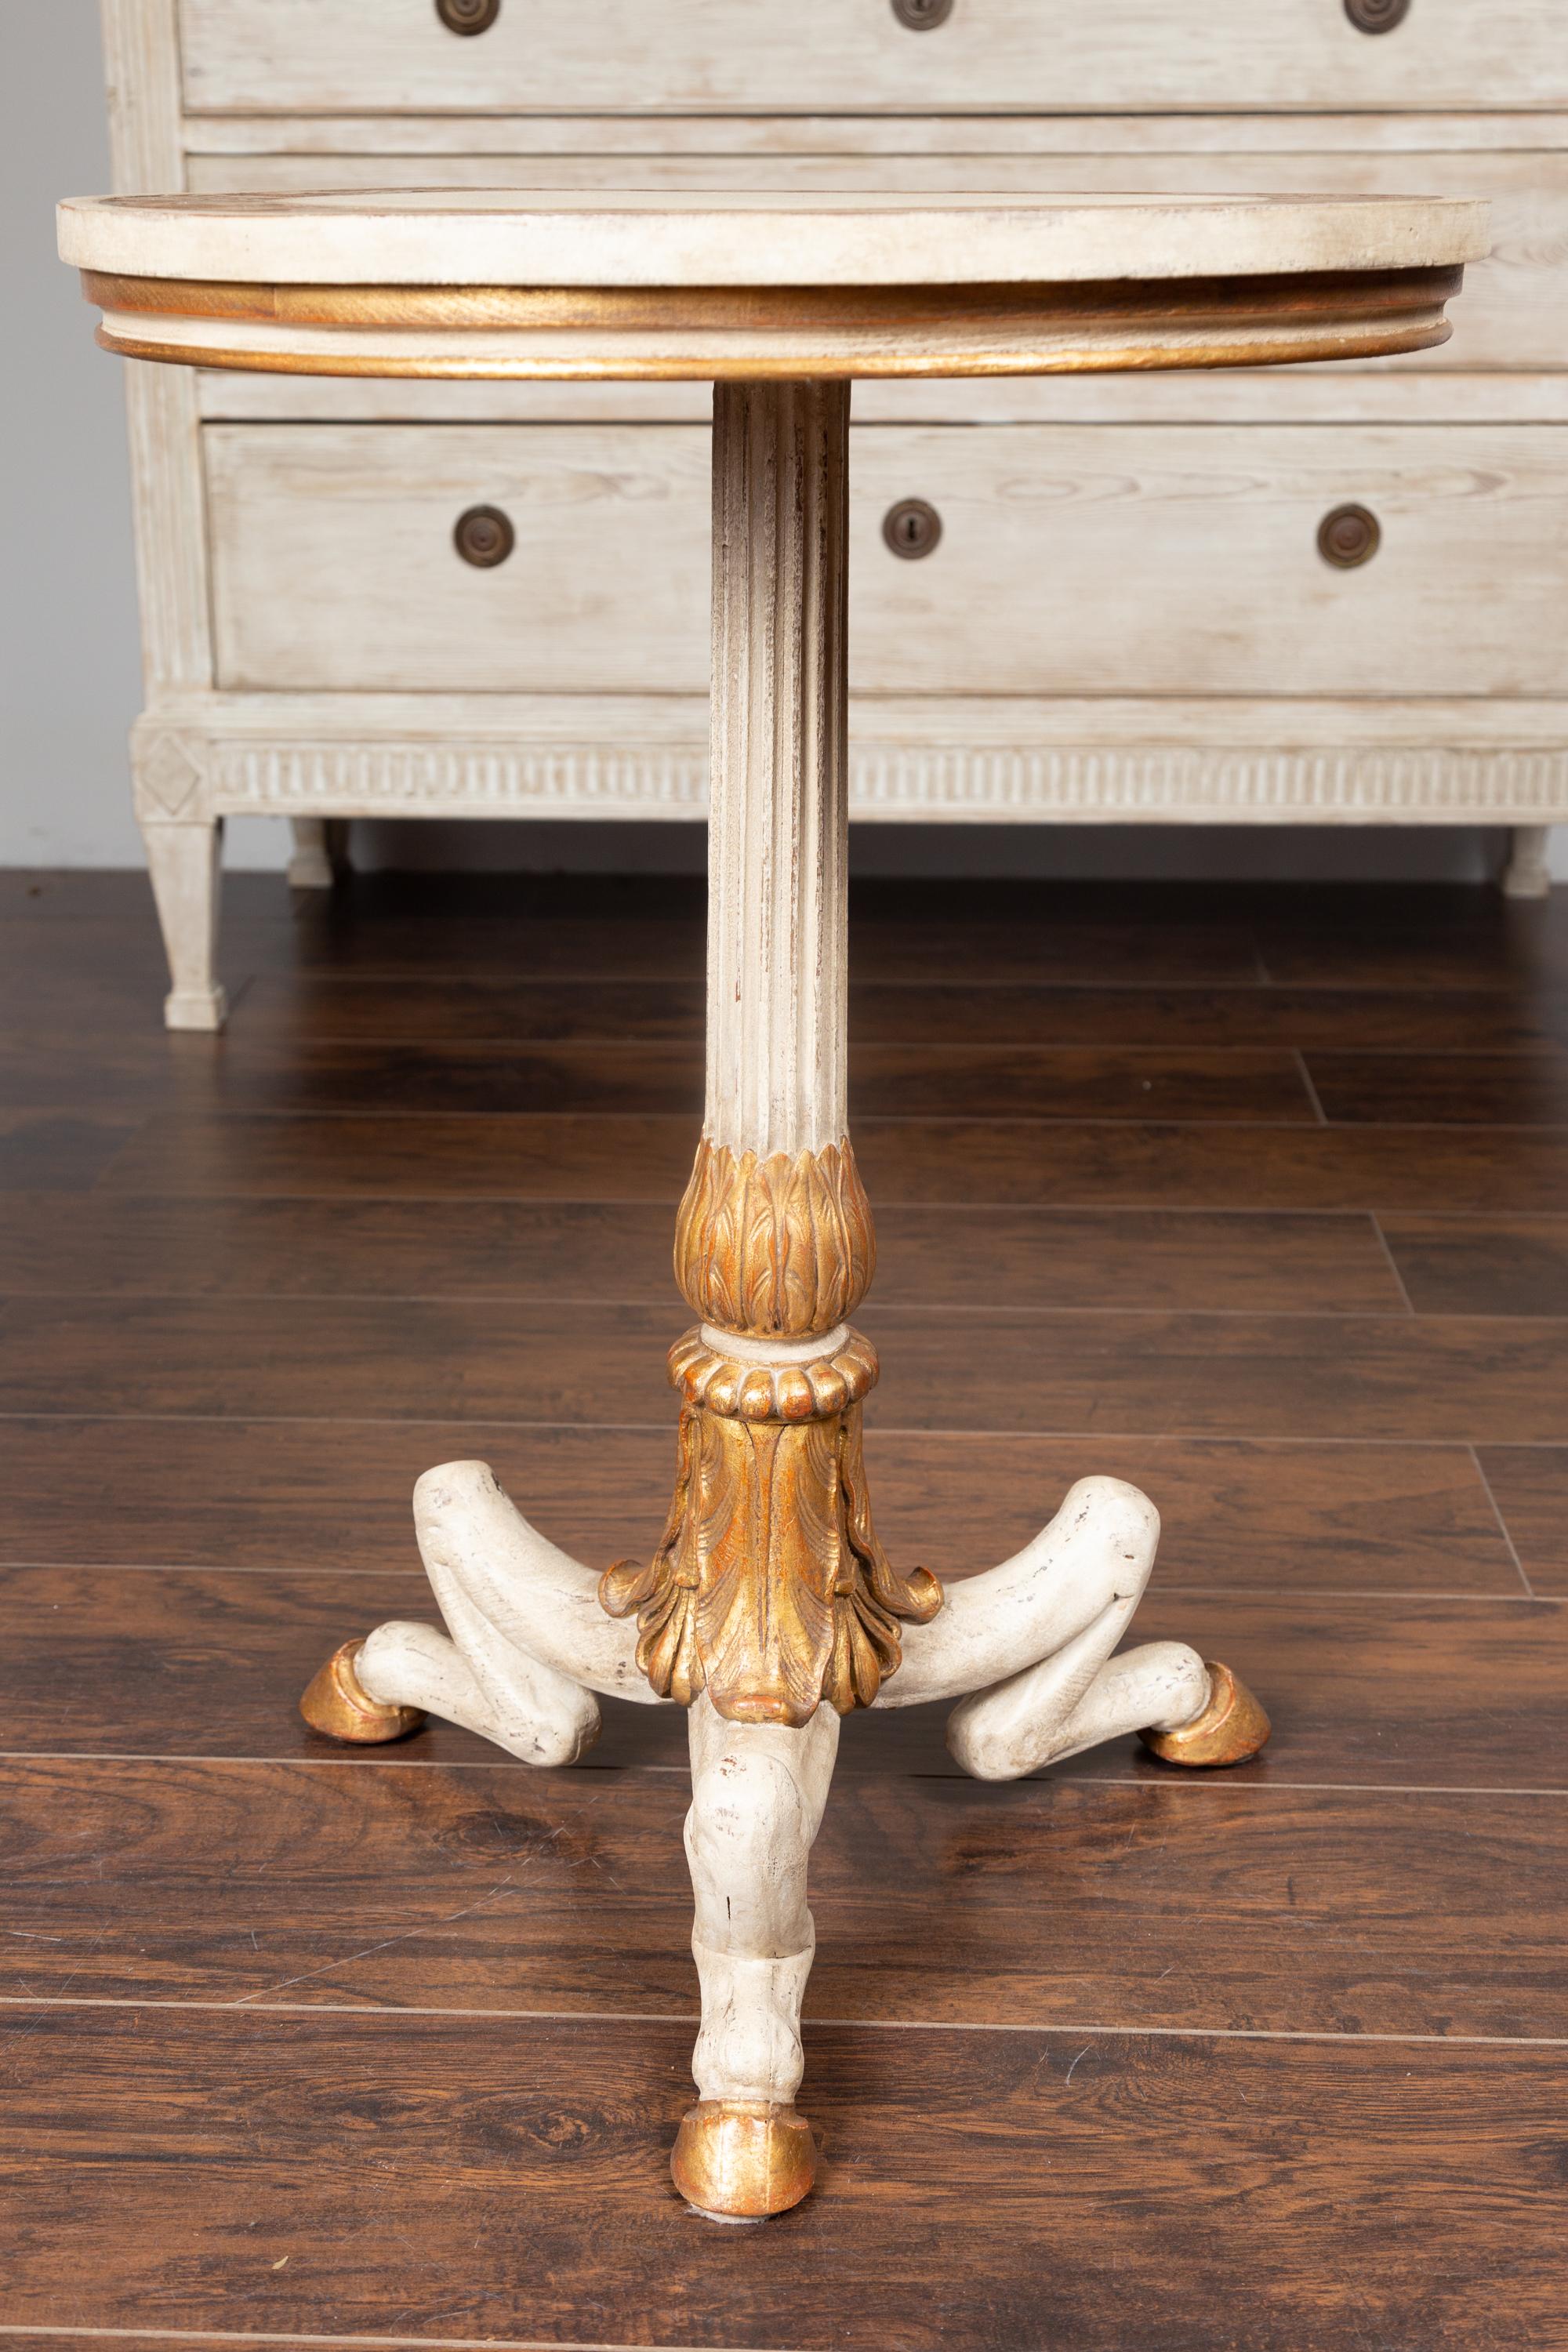 20th Century Italian 1930s Painted Wood Guéridon Table with Gilt Accents and Hoofed Feet For Sale